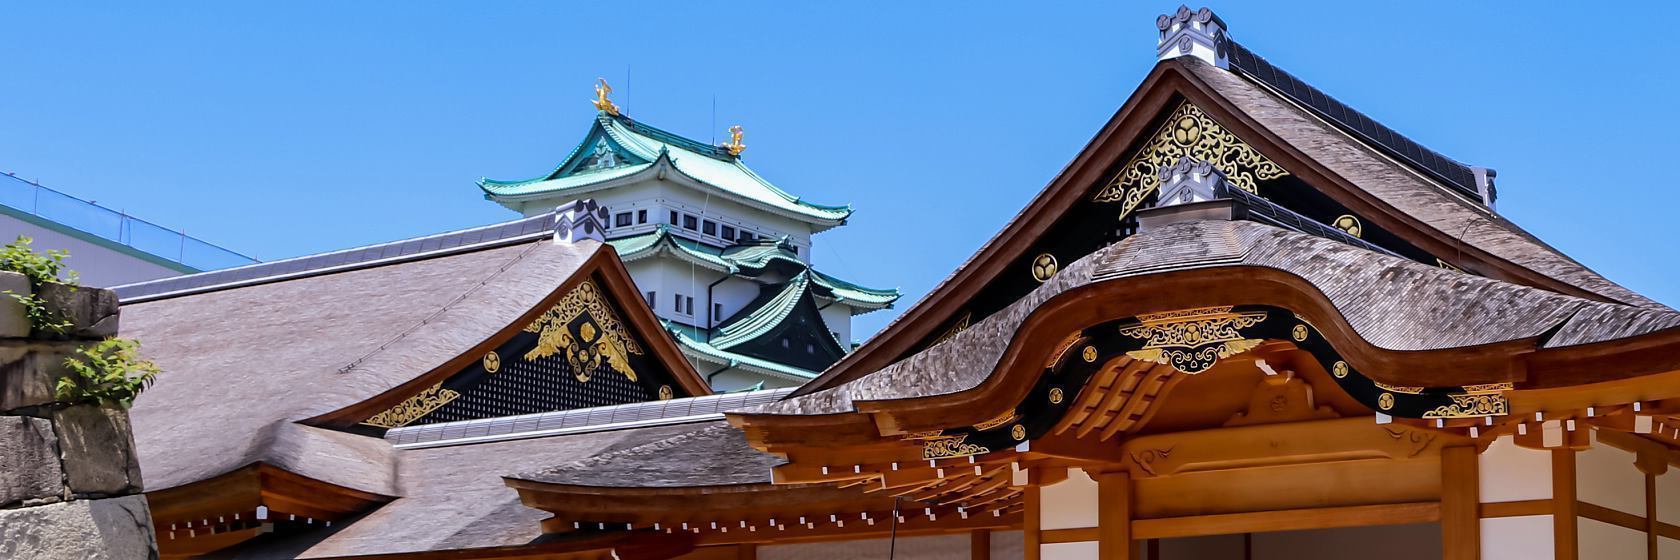 20 Best Things To Do In Nagoya Your Mini Guide Travel On The Brain